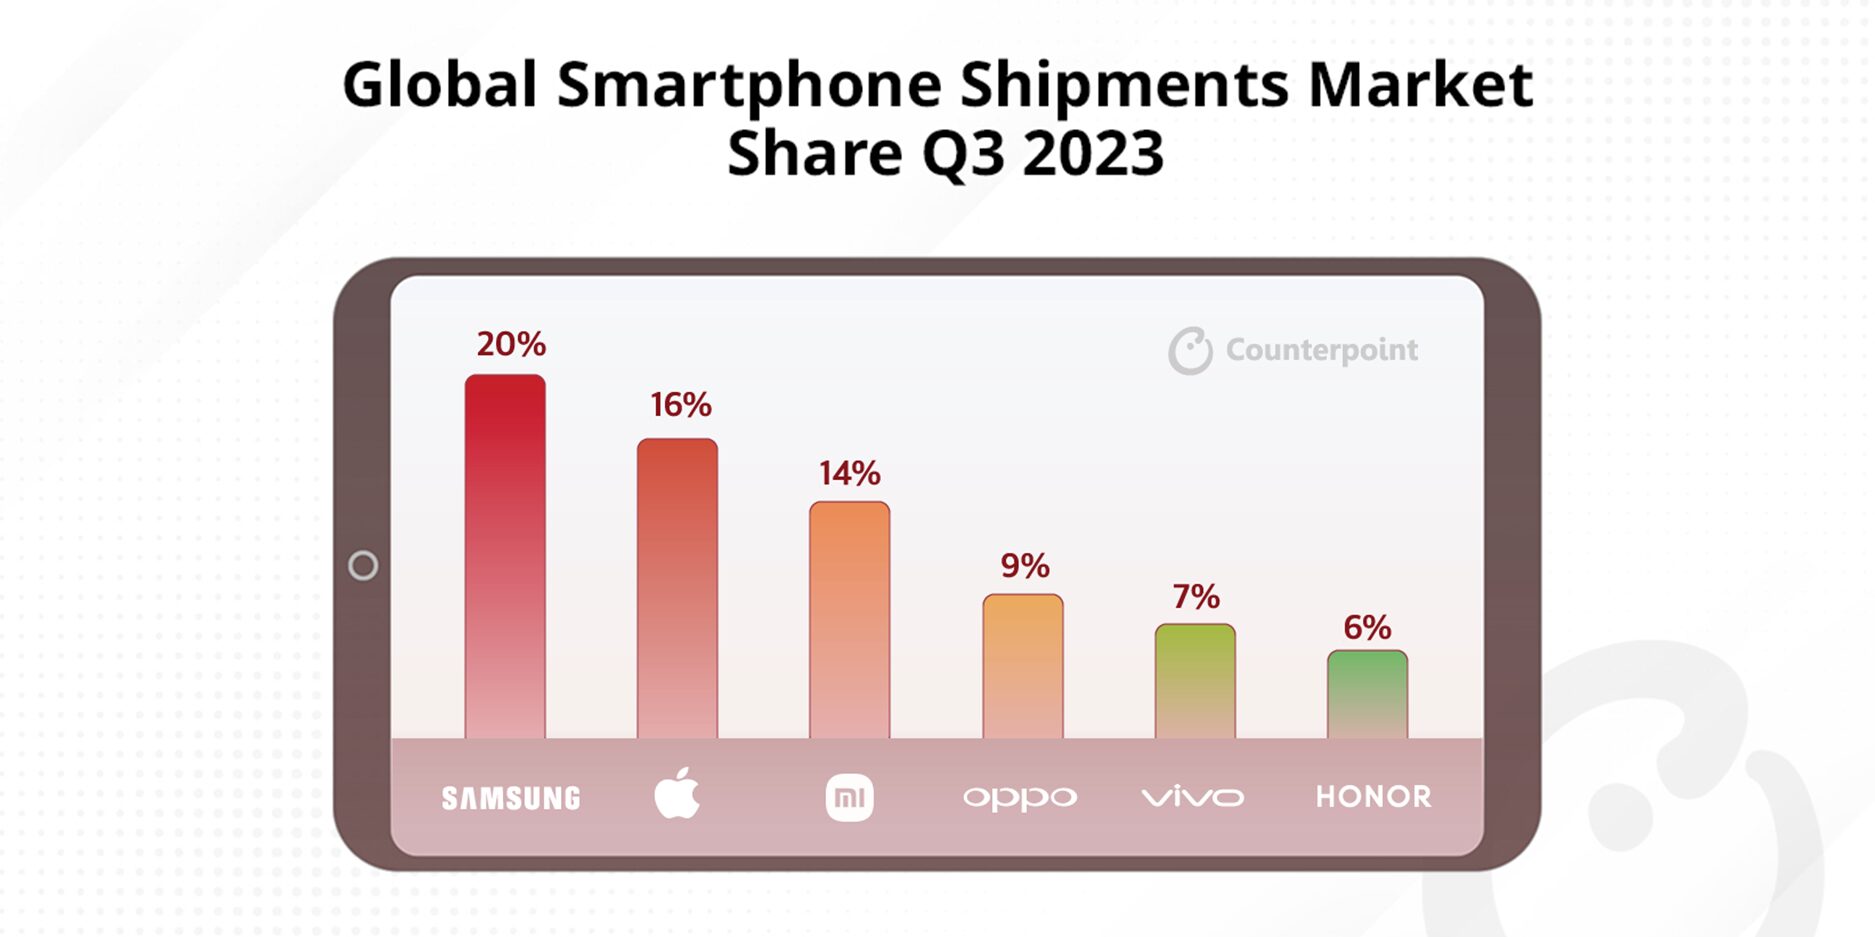 USA smartphone share  Archives - Counterpoint